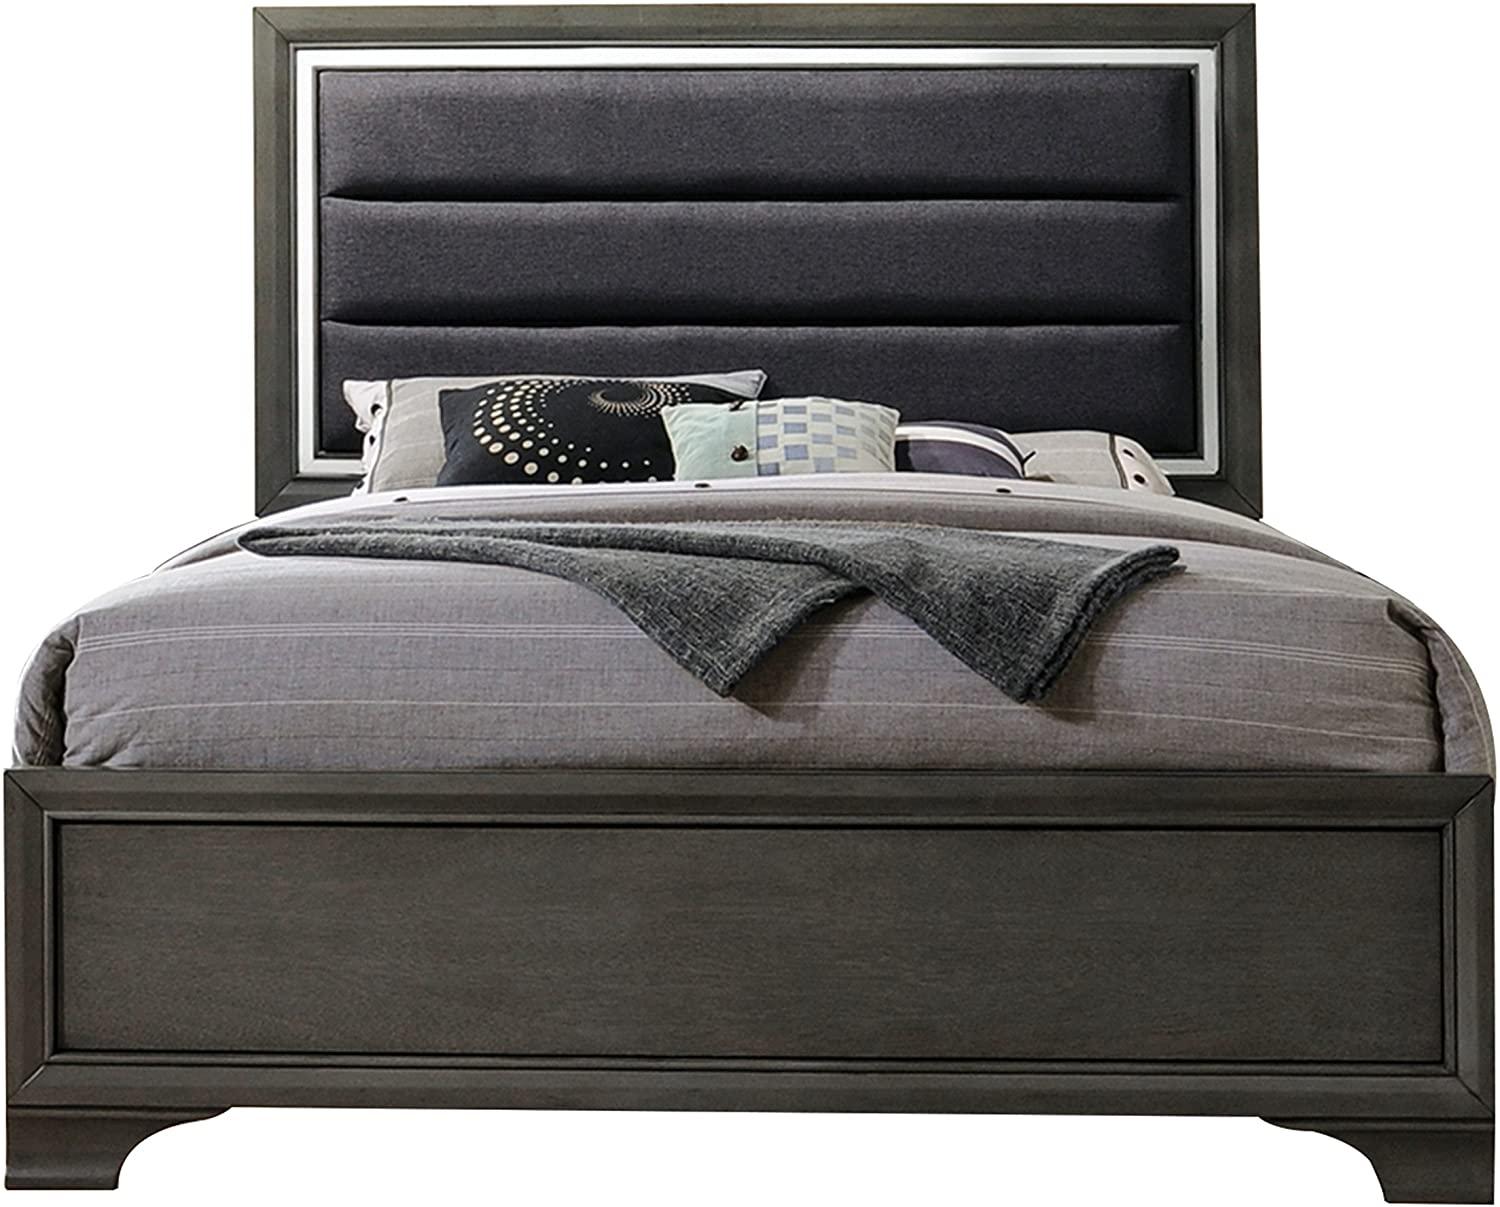 

    
Transitional Charcoal/Gray Finish Fabric Queen Bed Carine II-26260Q Acme
